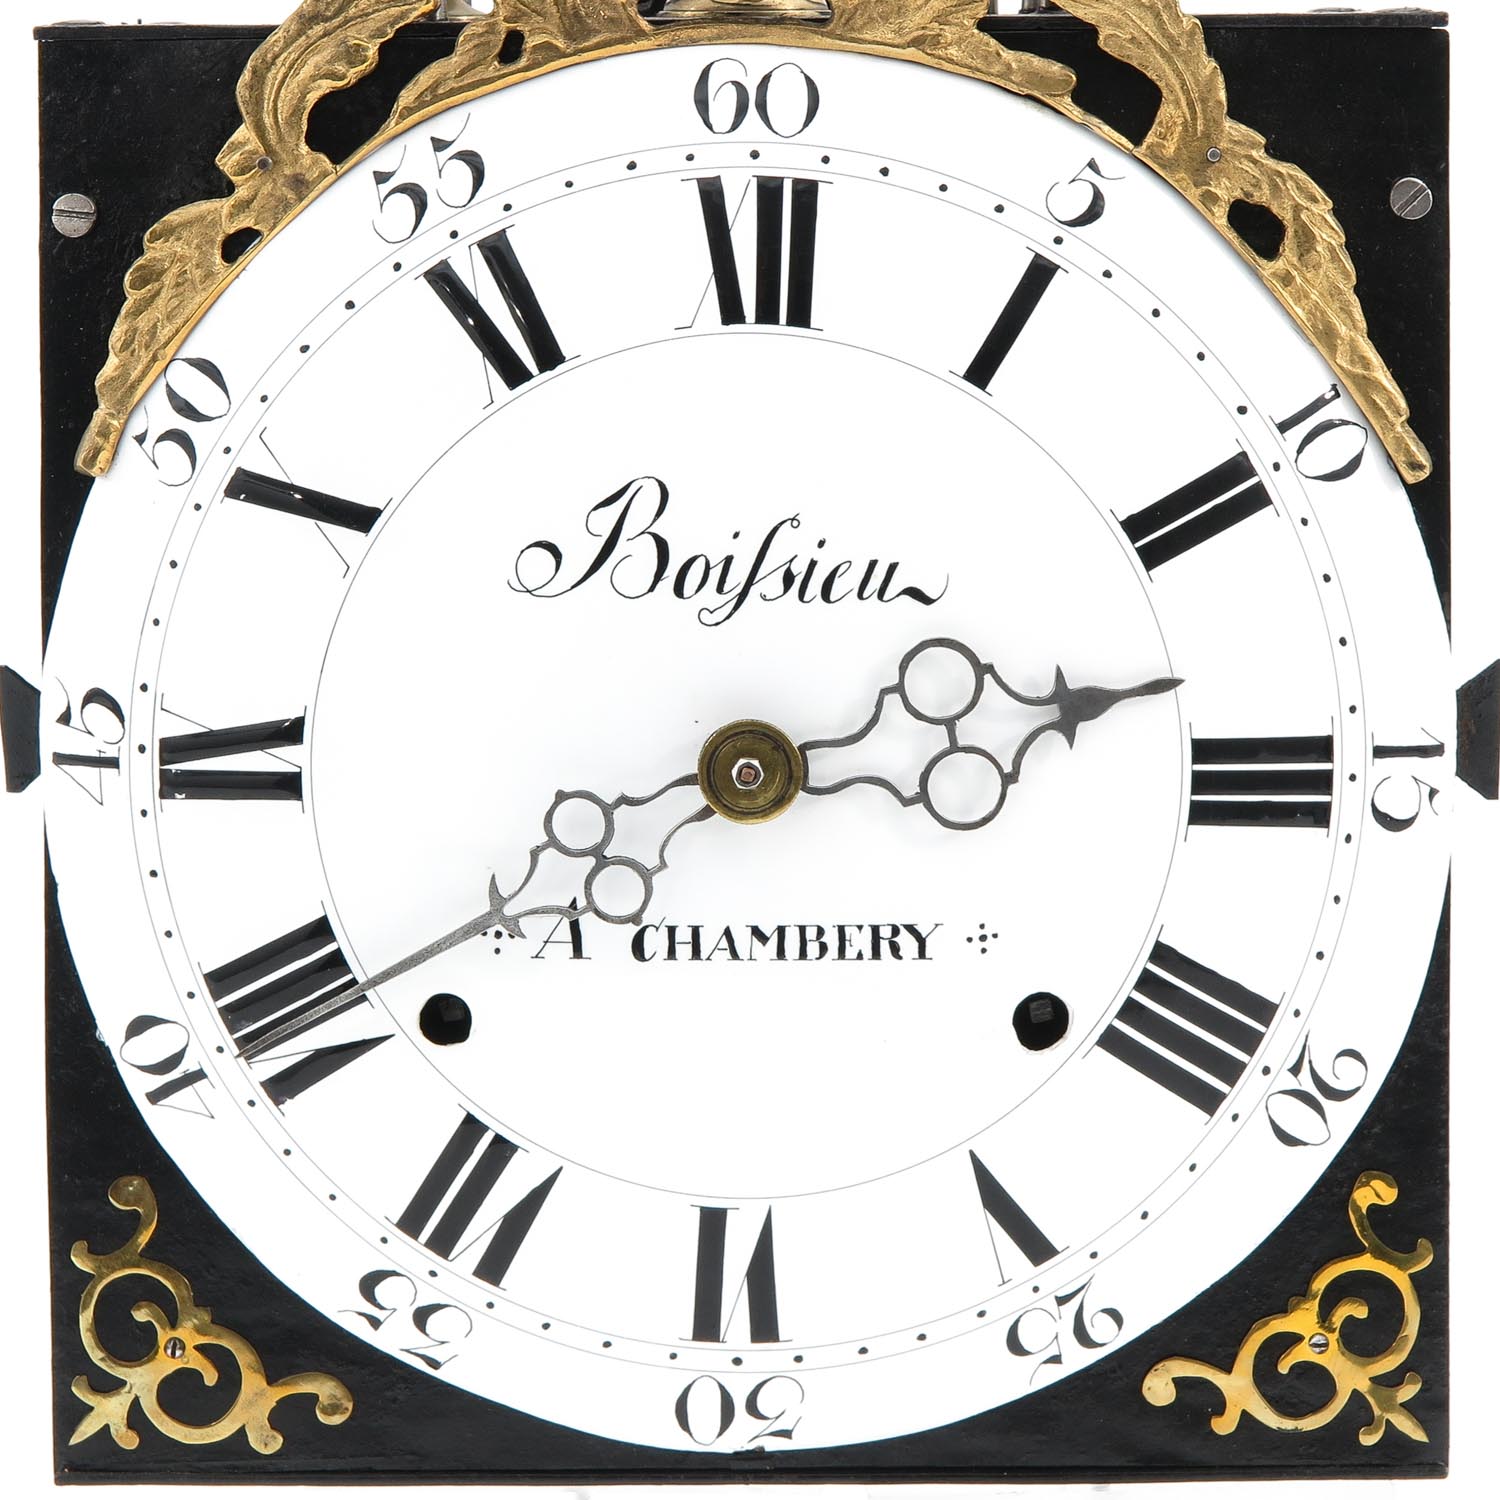 A French Comtoise Clock Signed Boifsieu a Chambery - Image 8 of 9